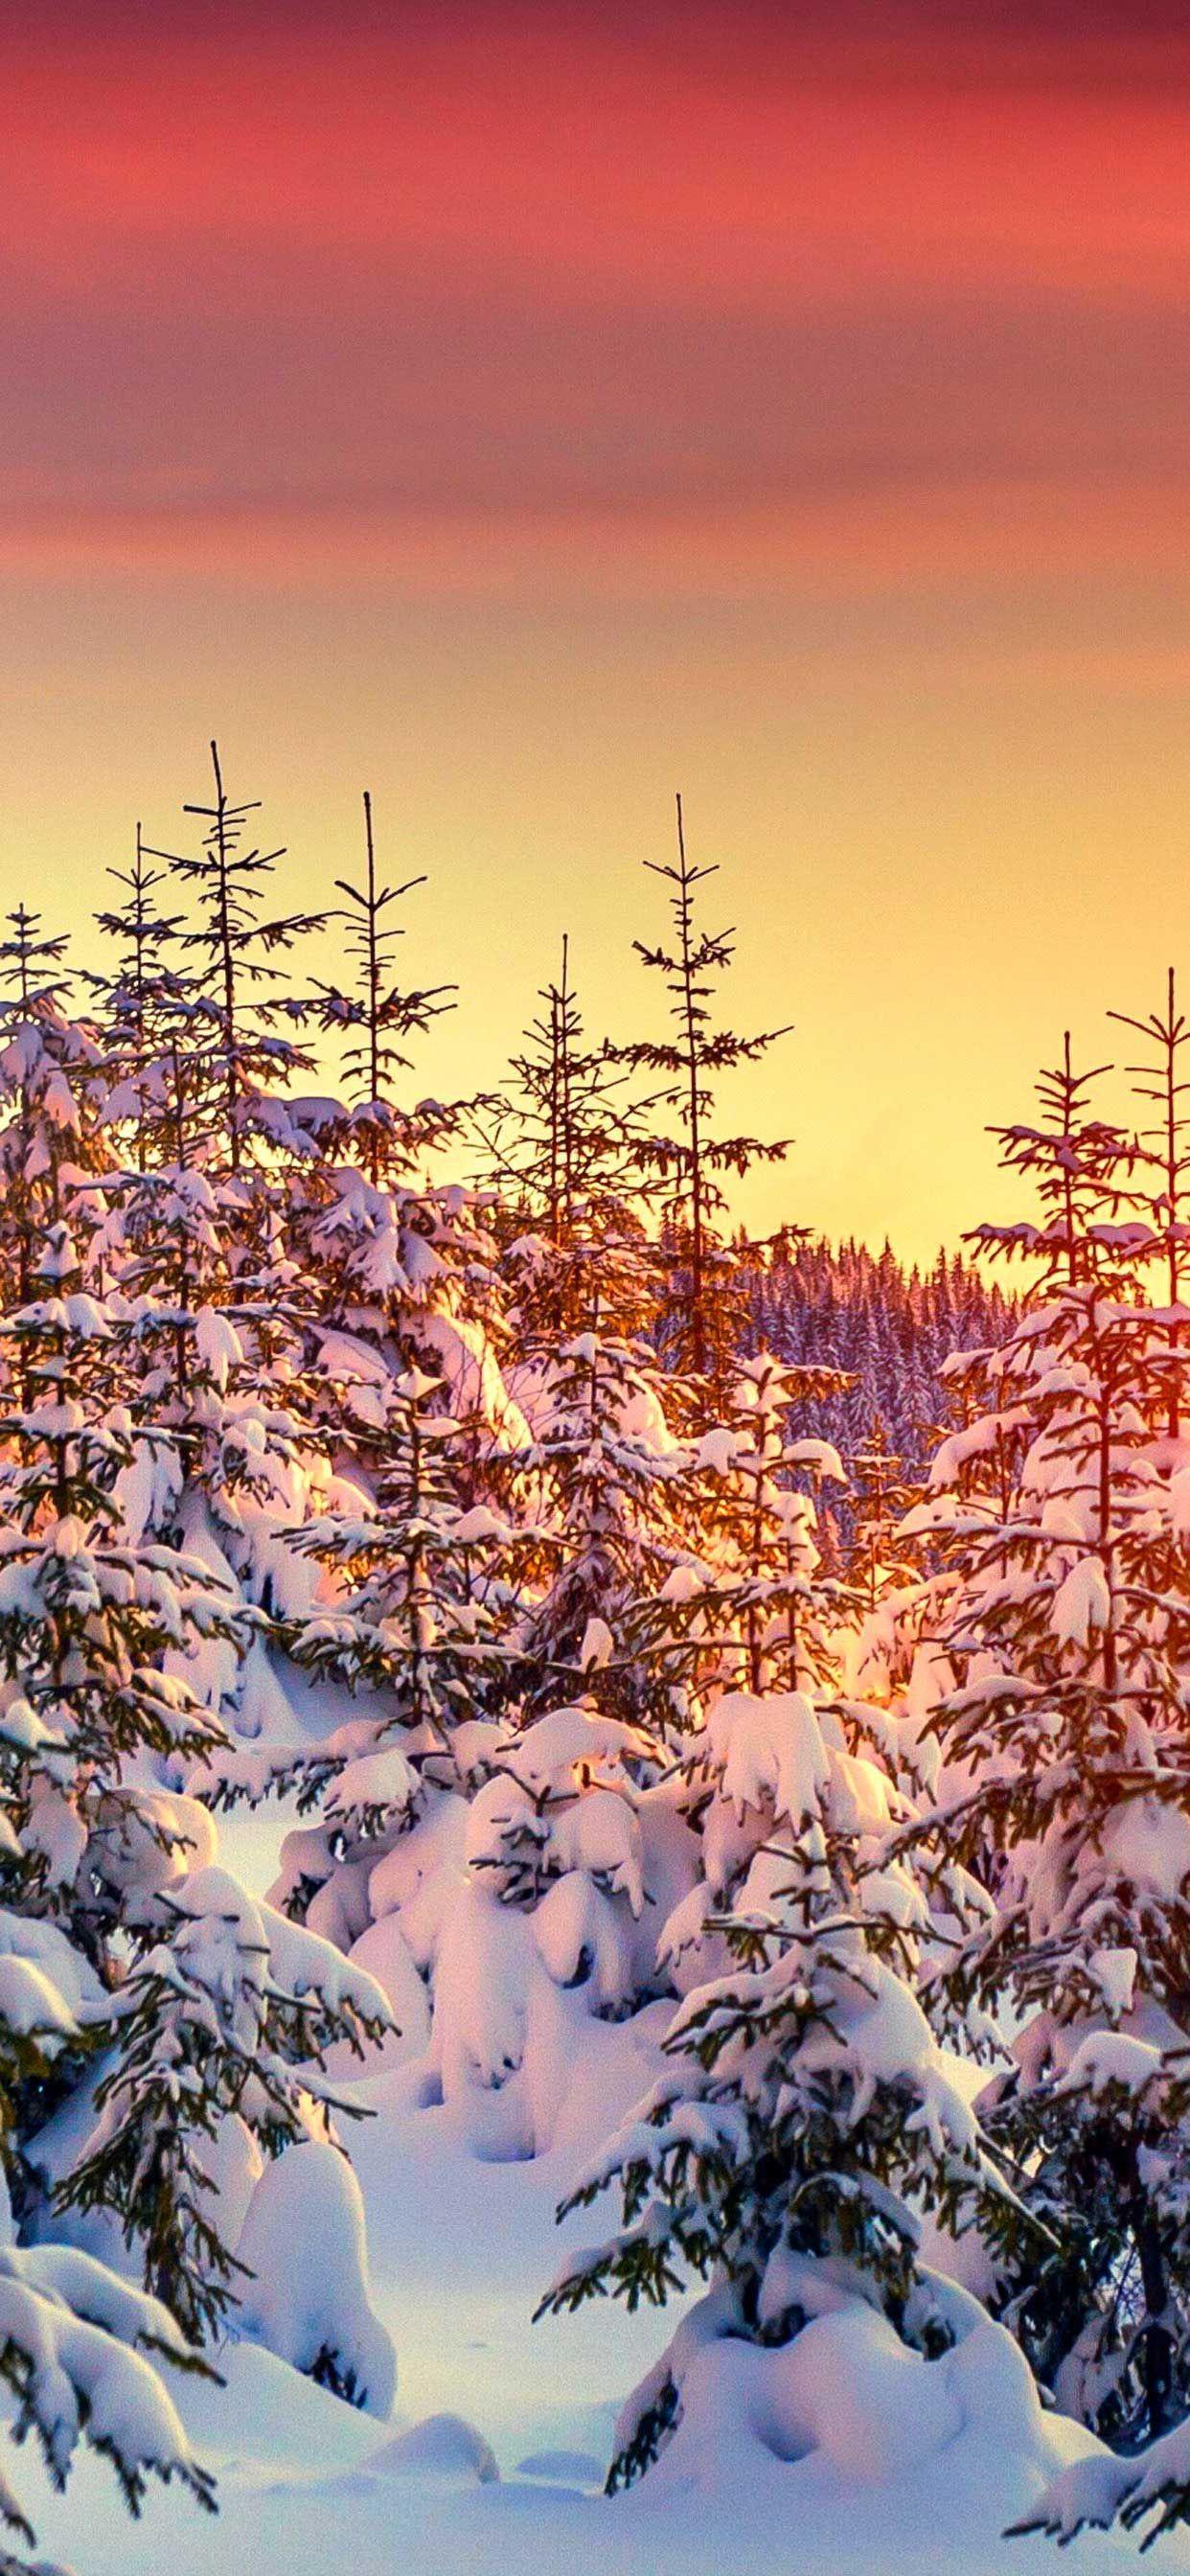 Winter spruce trees snow 1242x2688 iPhone 11 ProXS Max wallpaper  background picture image